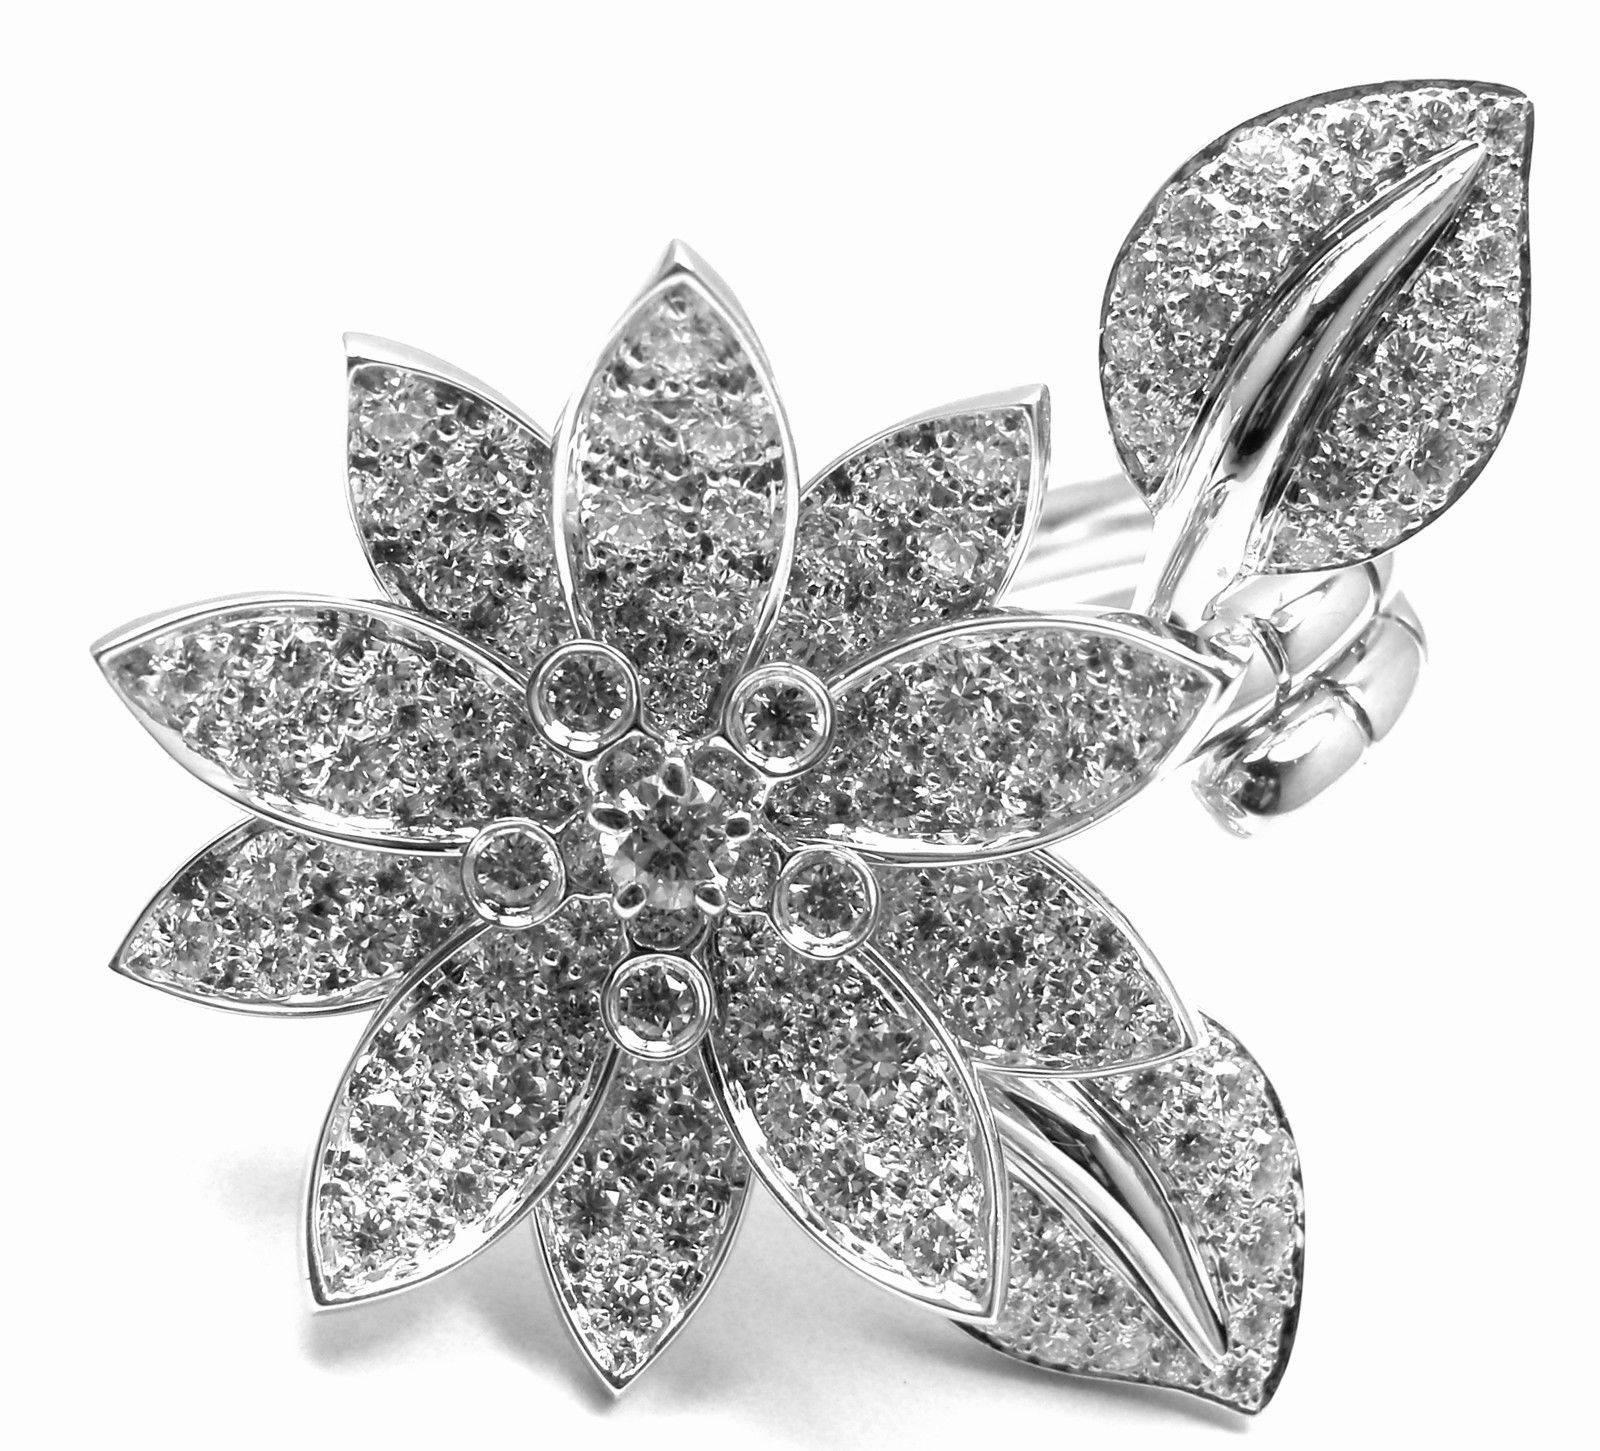 18k White Gold Lotus Flower Diamond Between The Finger Ring by Van Cleef & Arpels.  
With 127 round brilliant cut diamonds VVS1 clarity, E color
total weight approx. 2.13ct 
This ring comes with Van Cleef & Arpels box.  

Details:  
Weight: 20.3